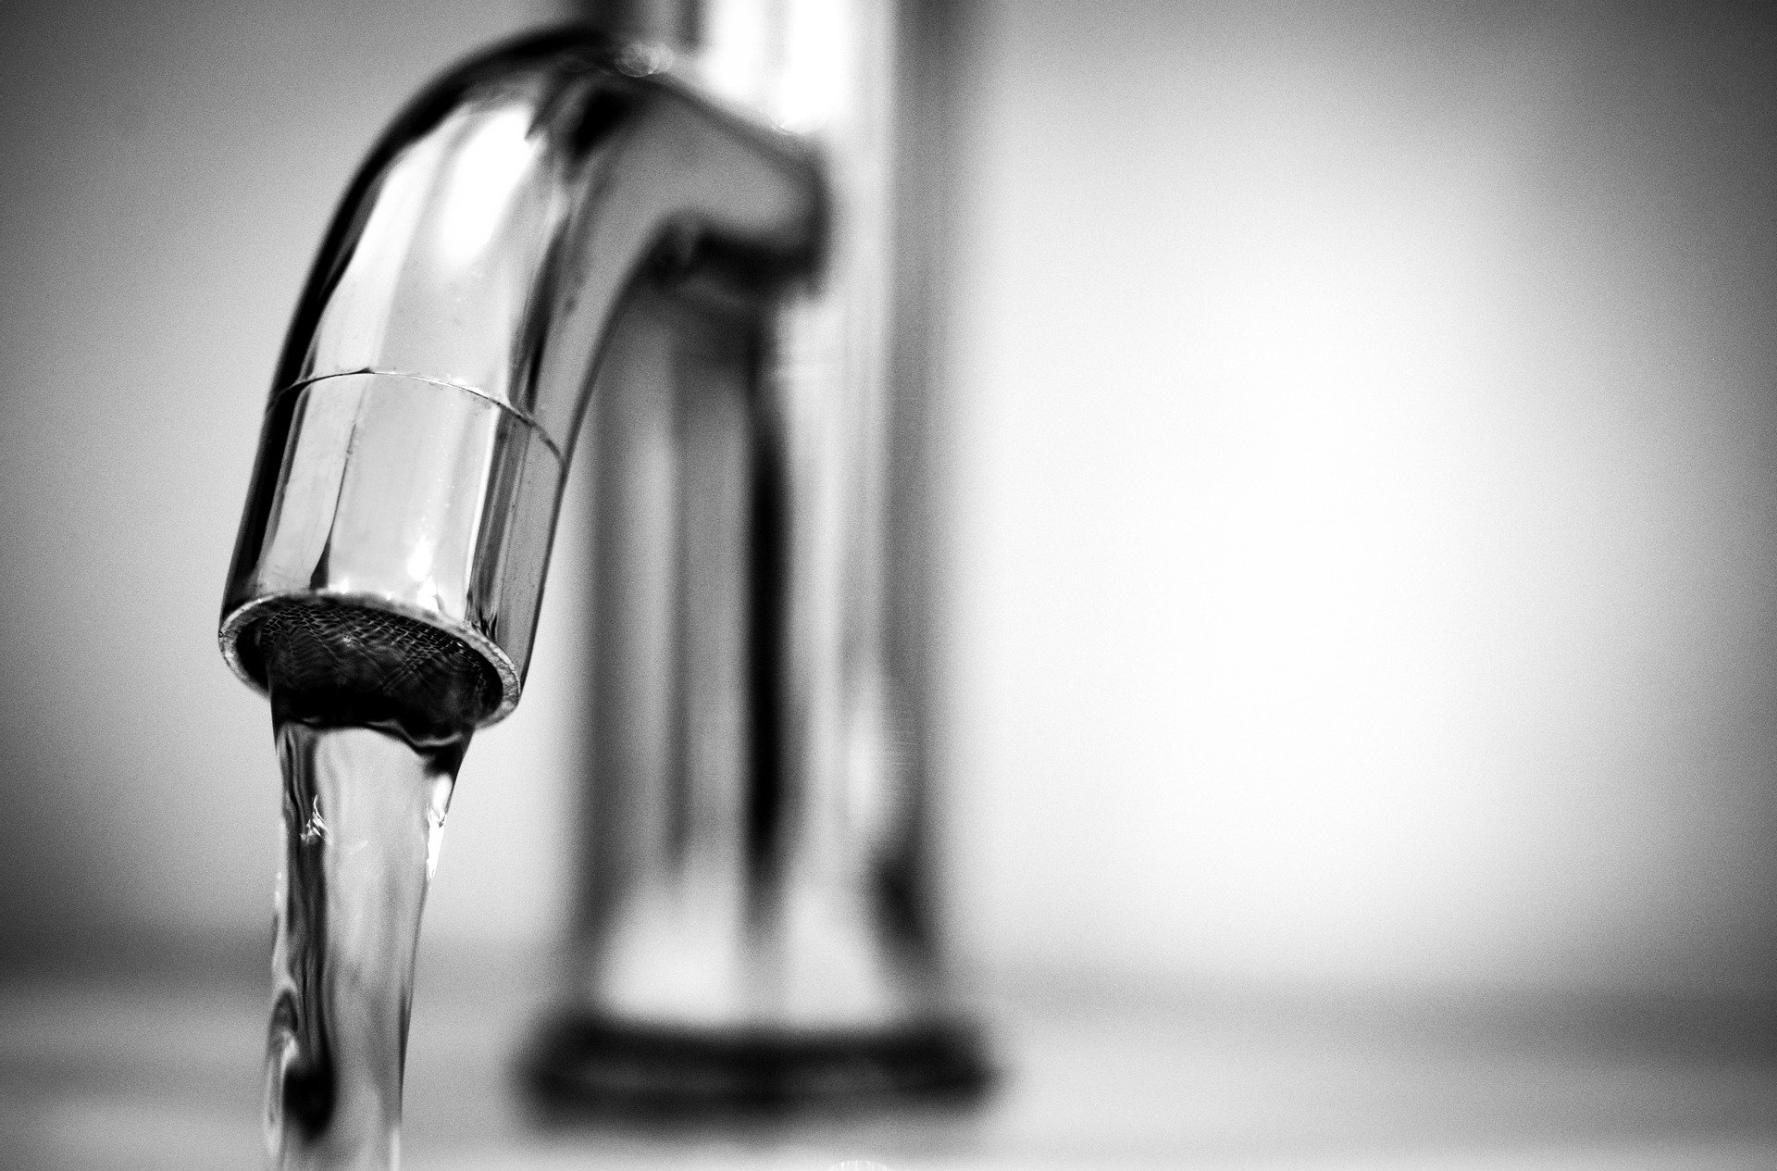 What To Do About Common Drinking Water Contaminants